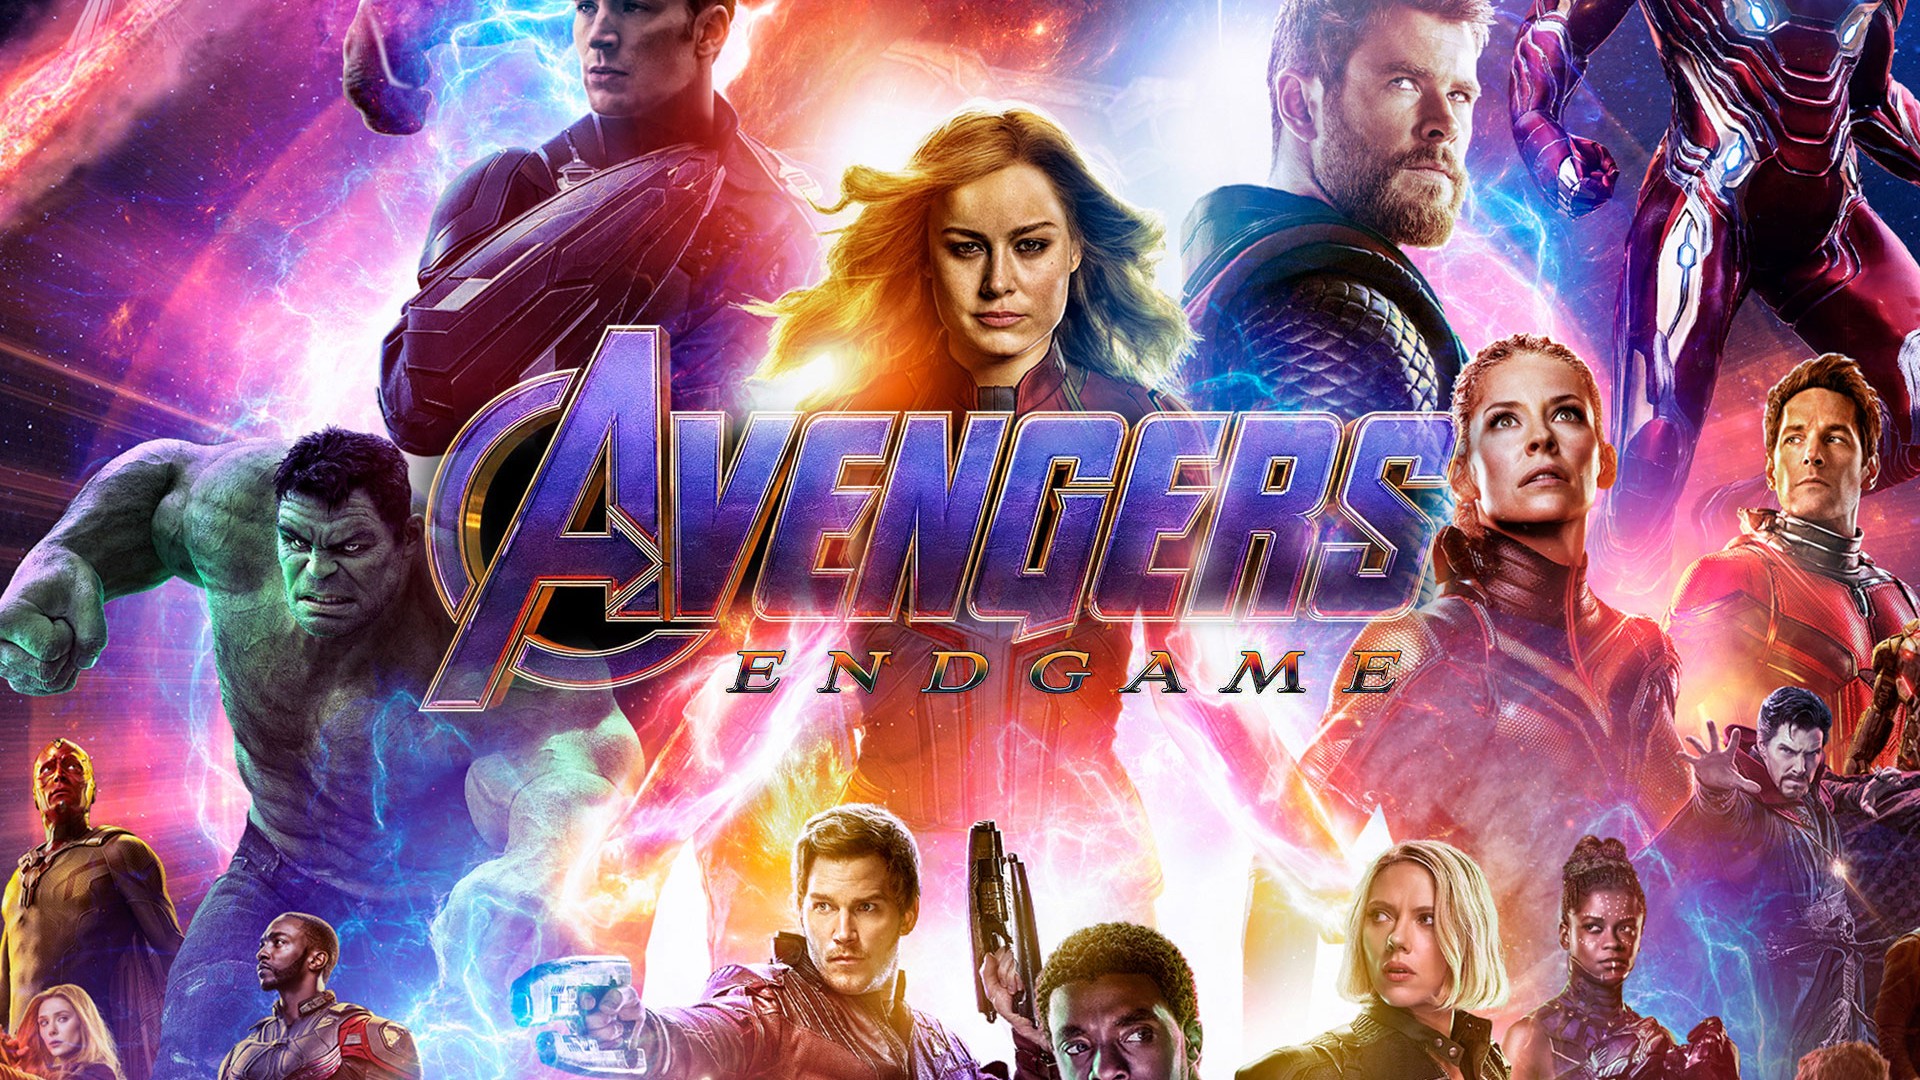 Avengers Endgame 2019 Poster Wallpaper with high-resolution 1920x1080 pixel. You can use this poster wallpaper for your Desktop Computers, Mac Screensavers, Windows Backgrounds, iPhone Wallpapers, Tablet or Android Lock screen and another Mobile device